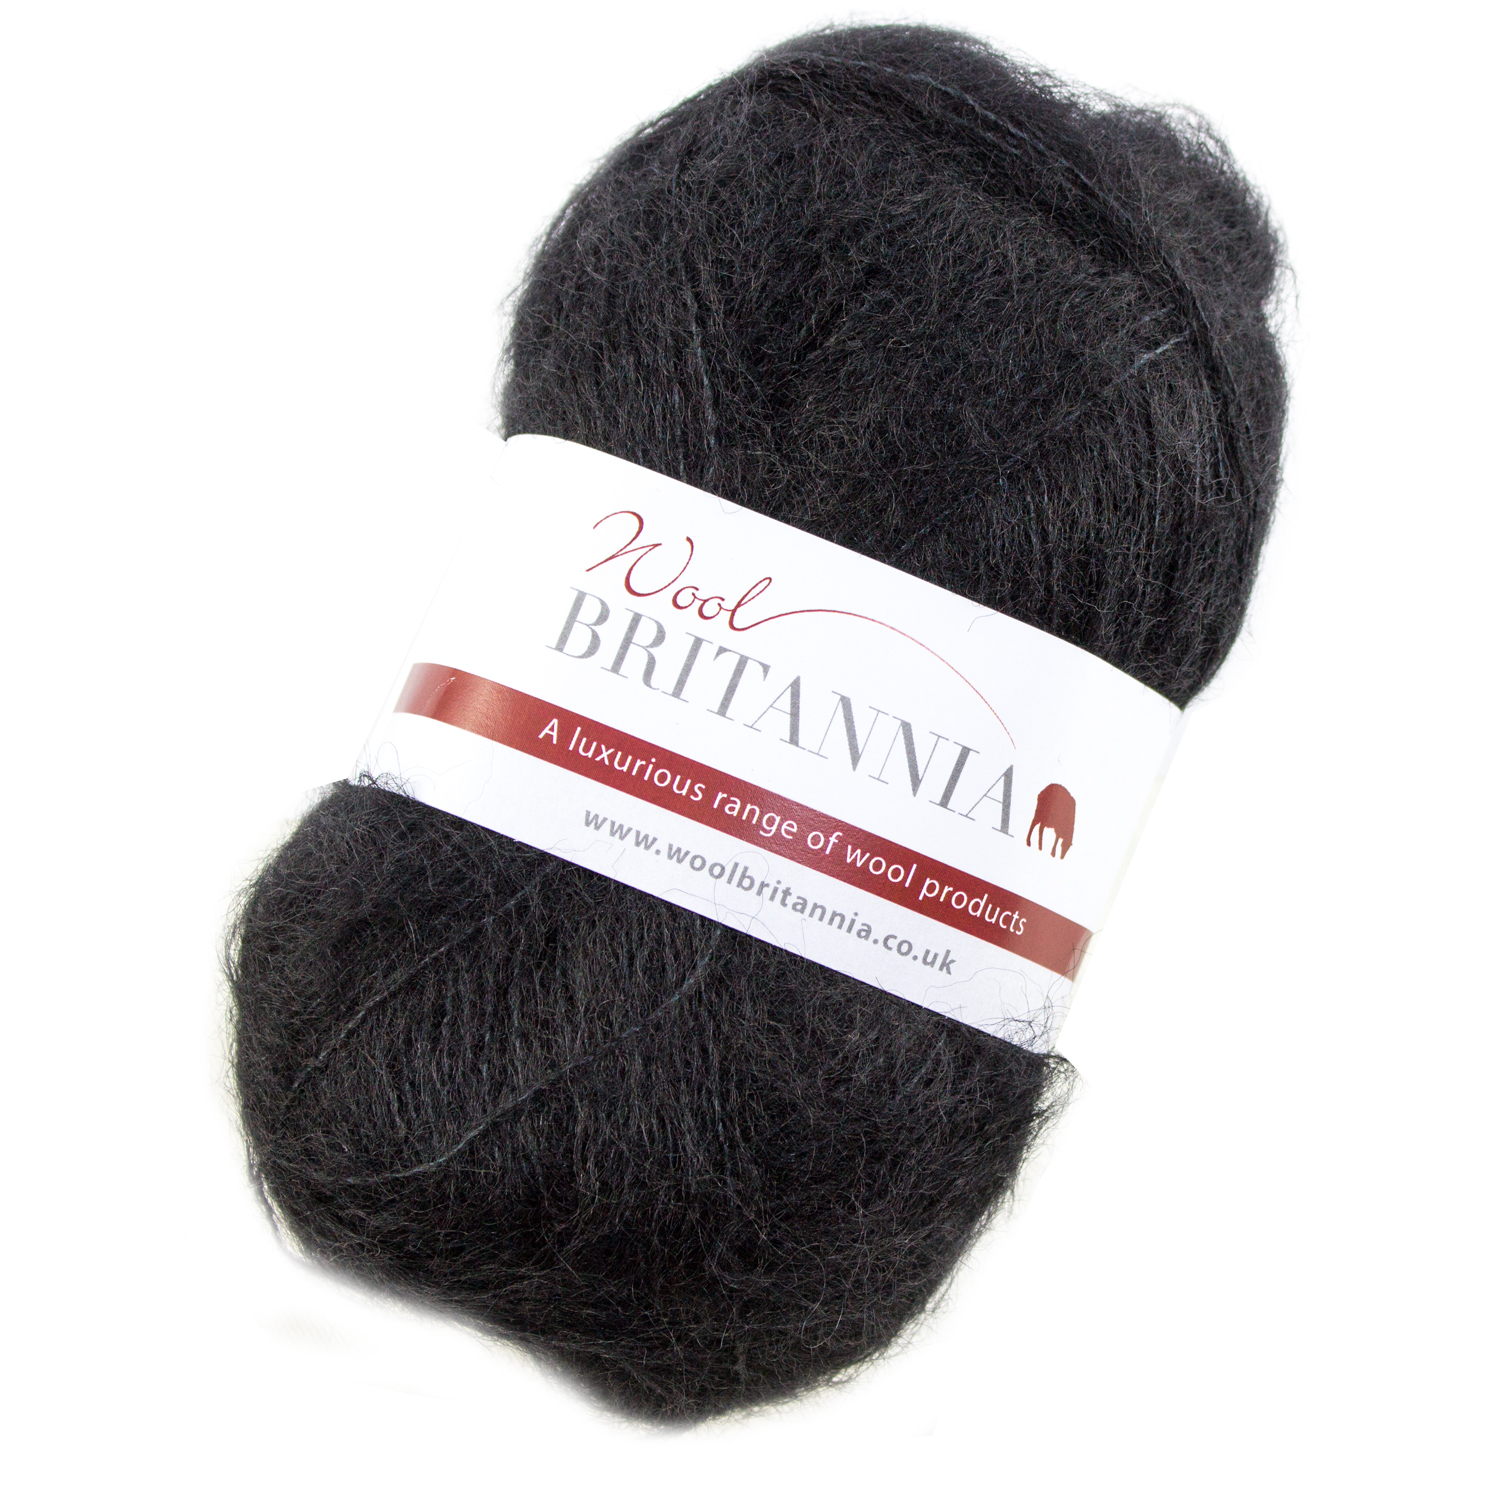 Brushed Mohair DK Double Knitting shade Black British made